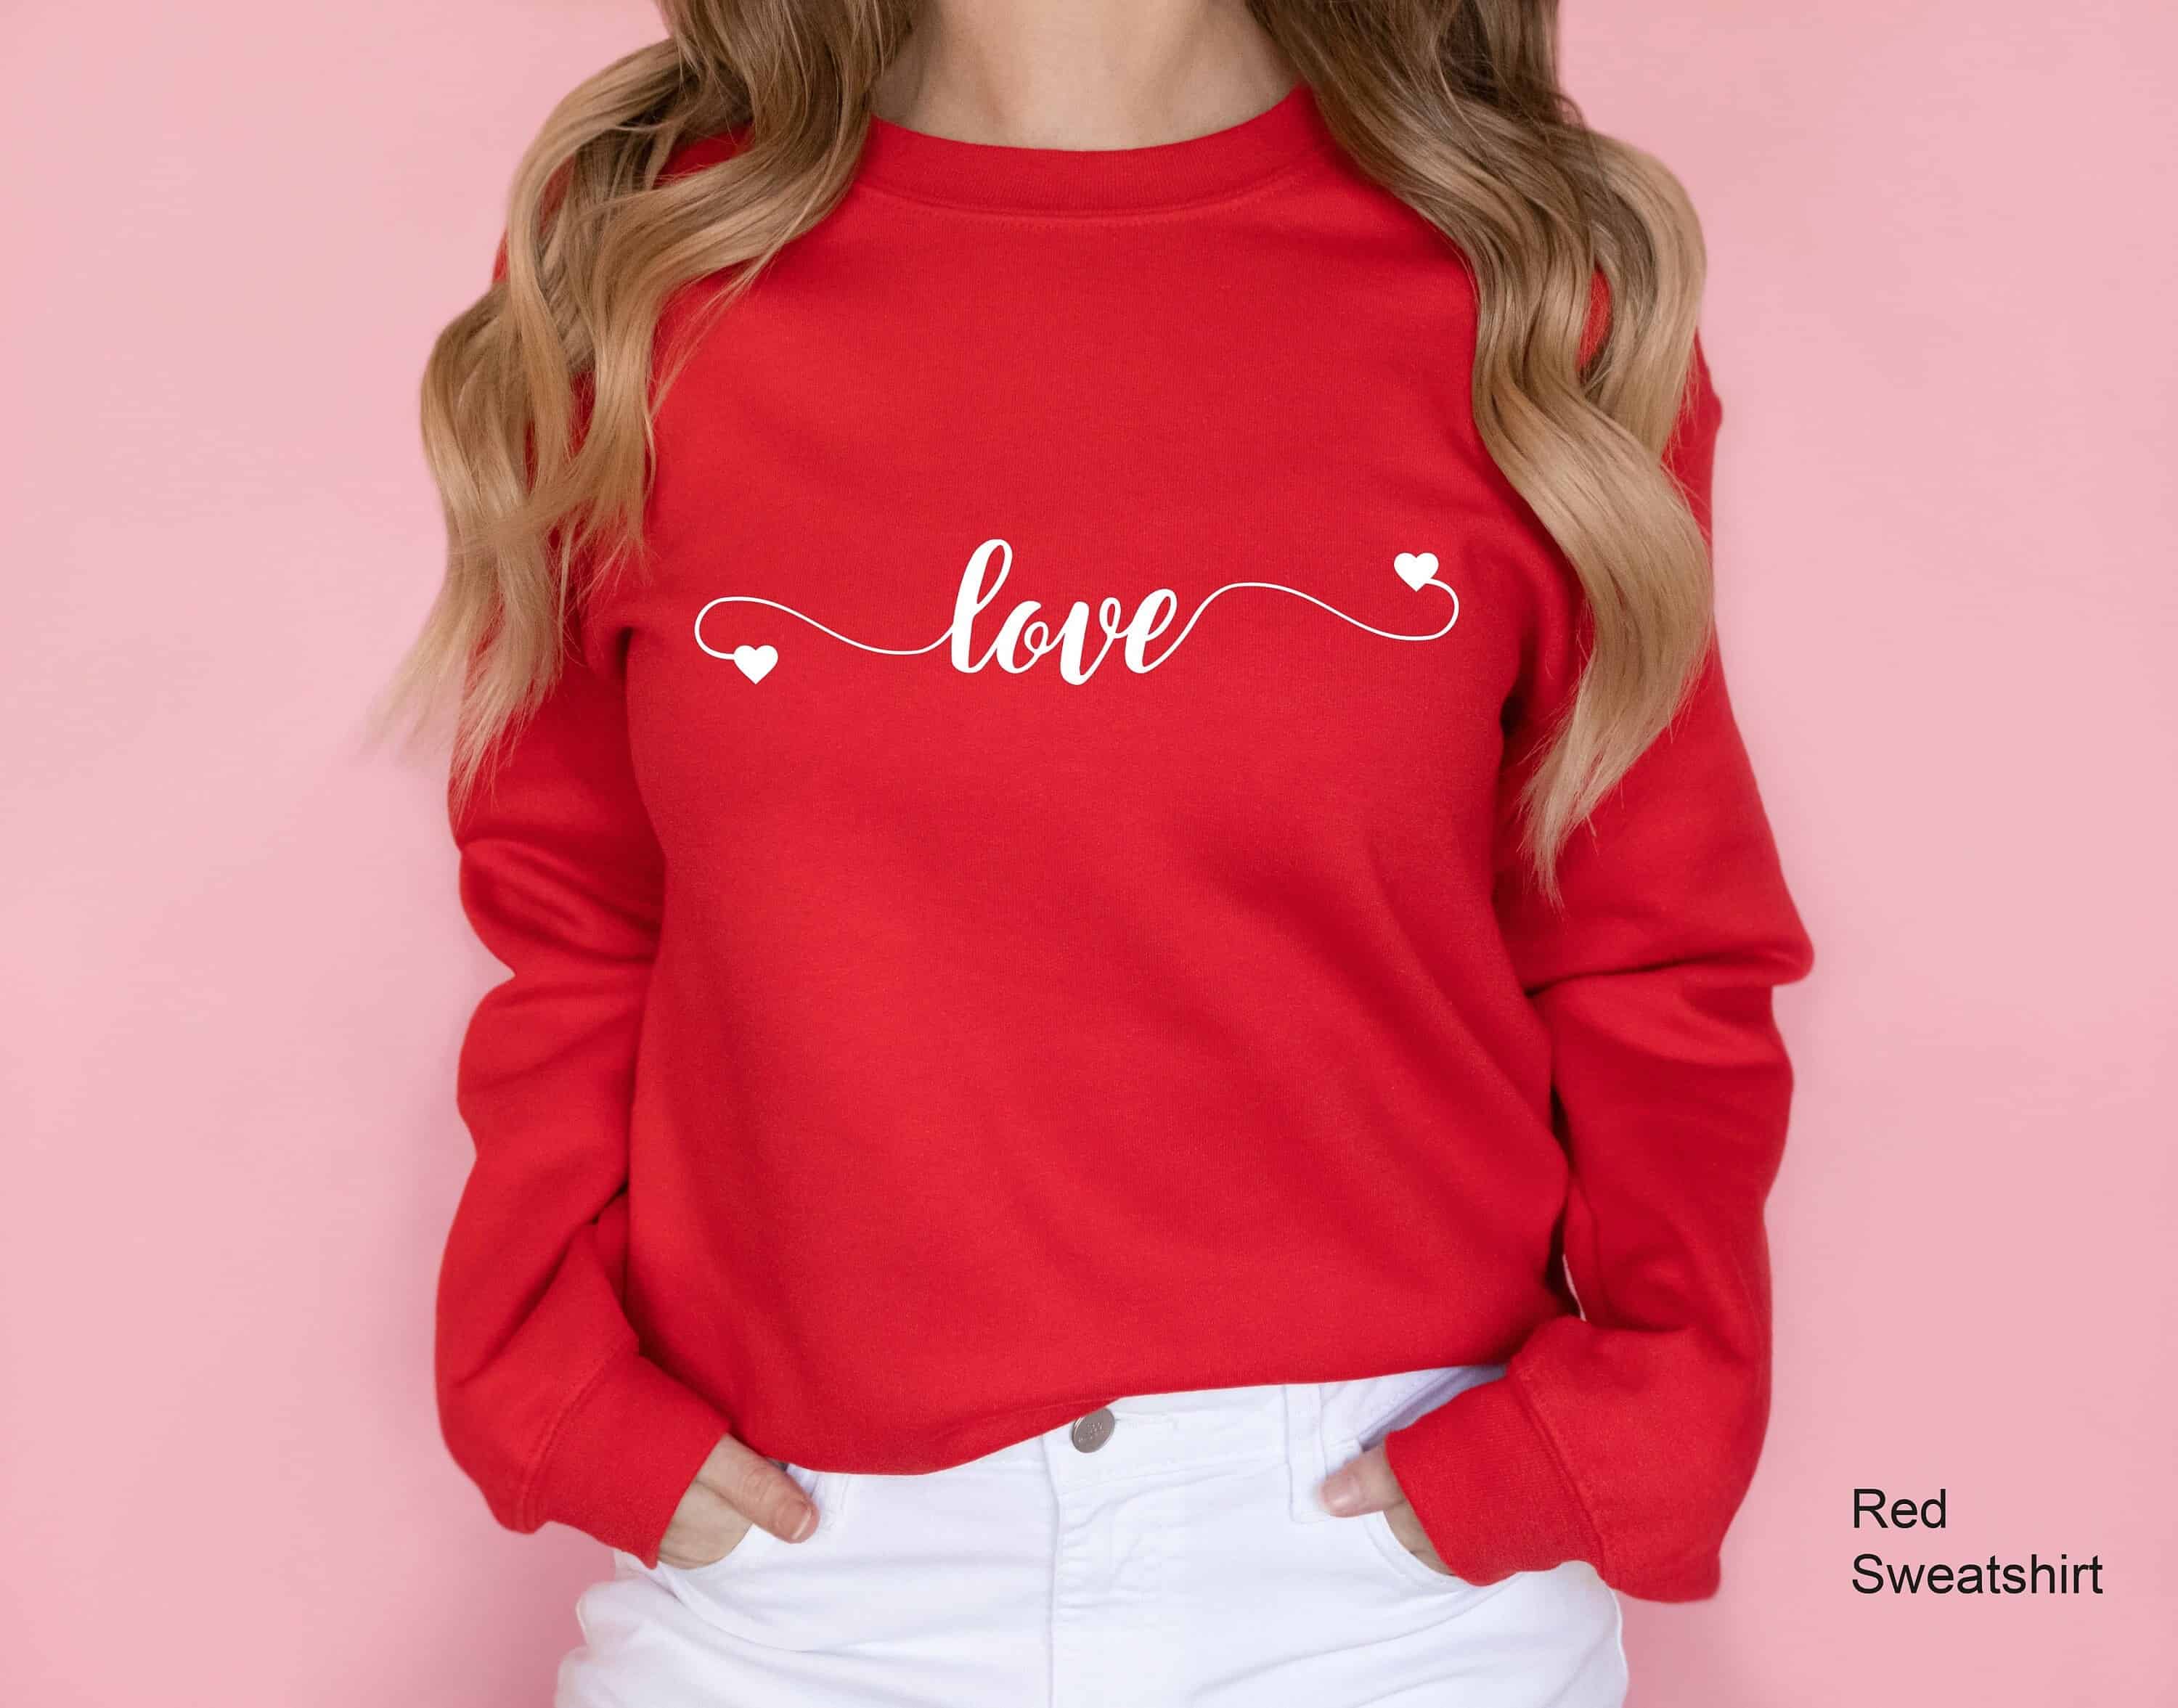 Birthday Gift For Wife Newlywed Gift Love Shirt Gift For Fiance Engagement Shirt.Love Top Gift For Wife Love T-Shirt love tee